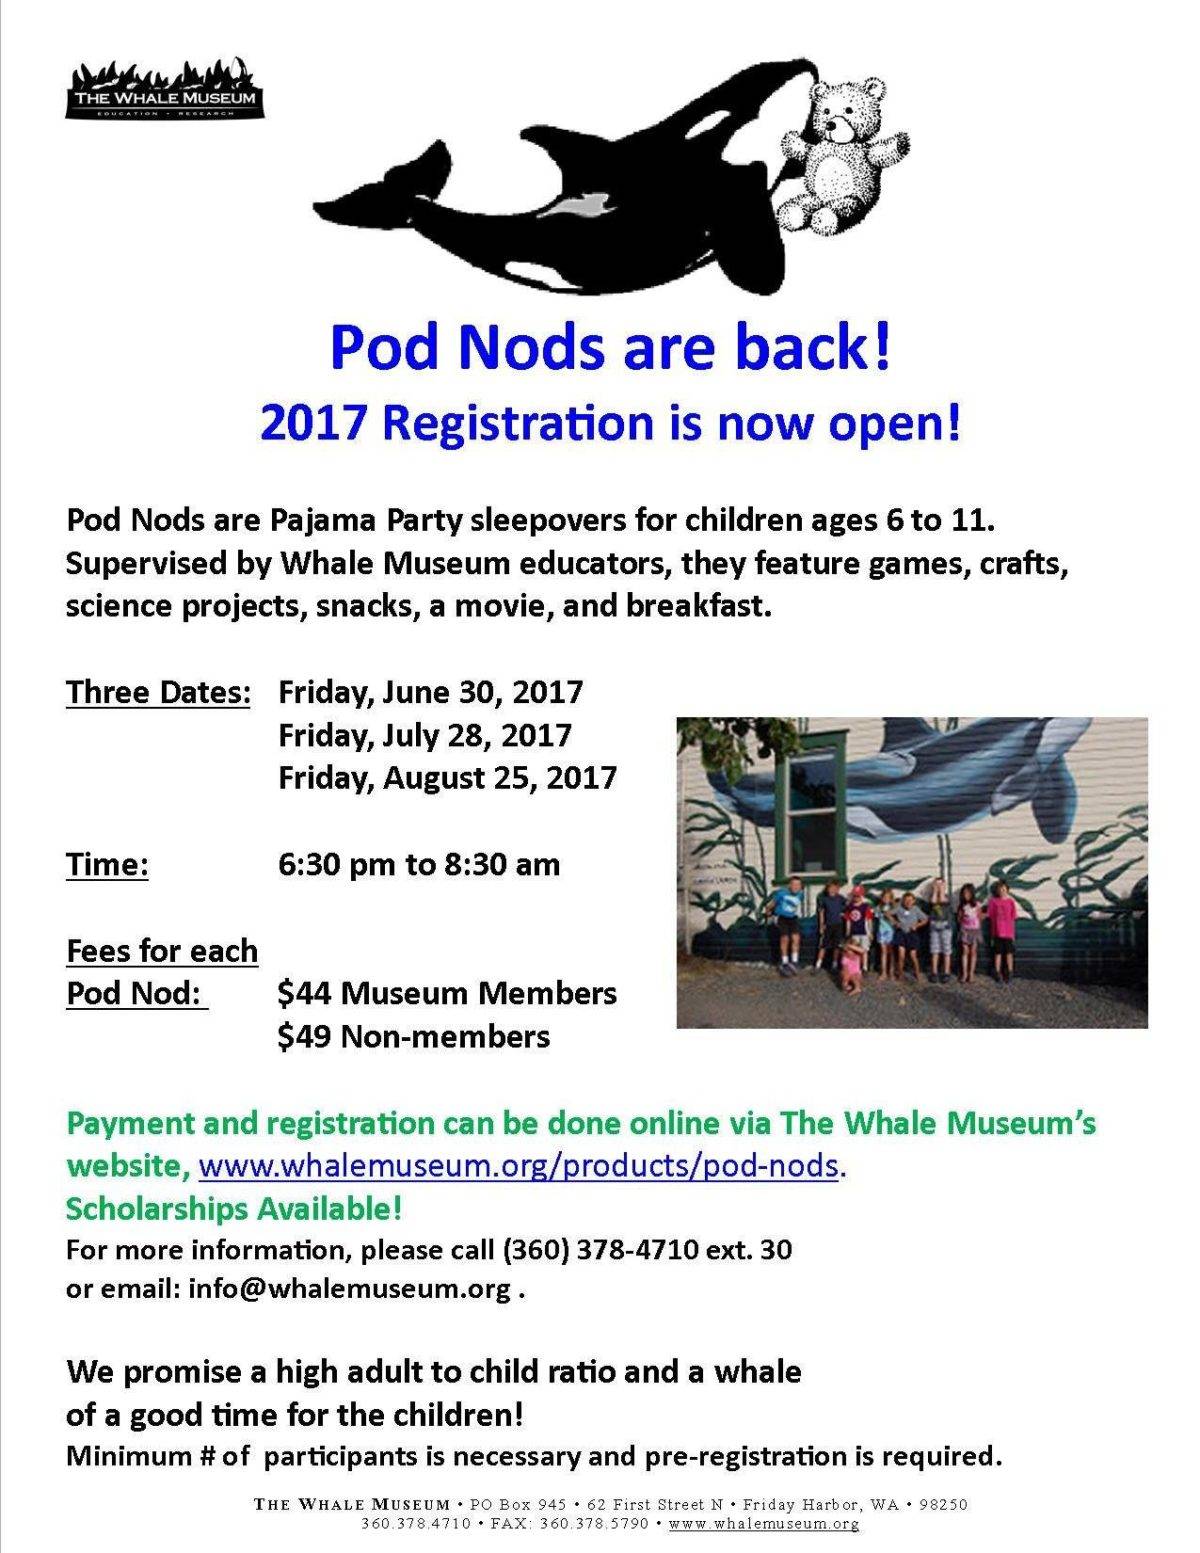 Final sleepover of the summer at The Whale Museum